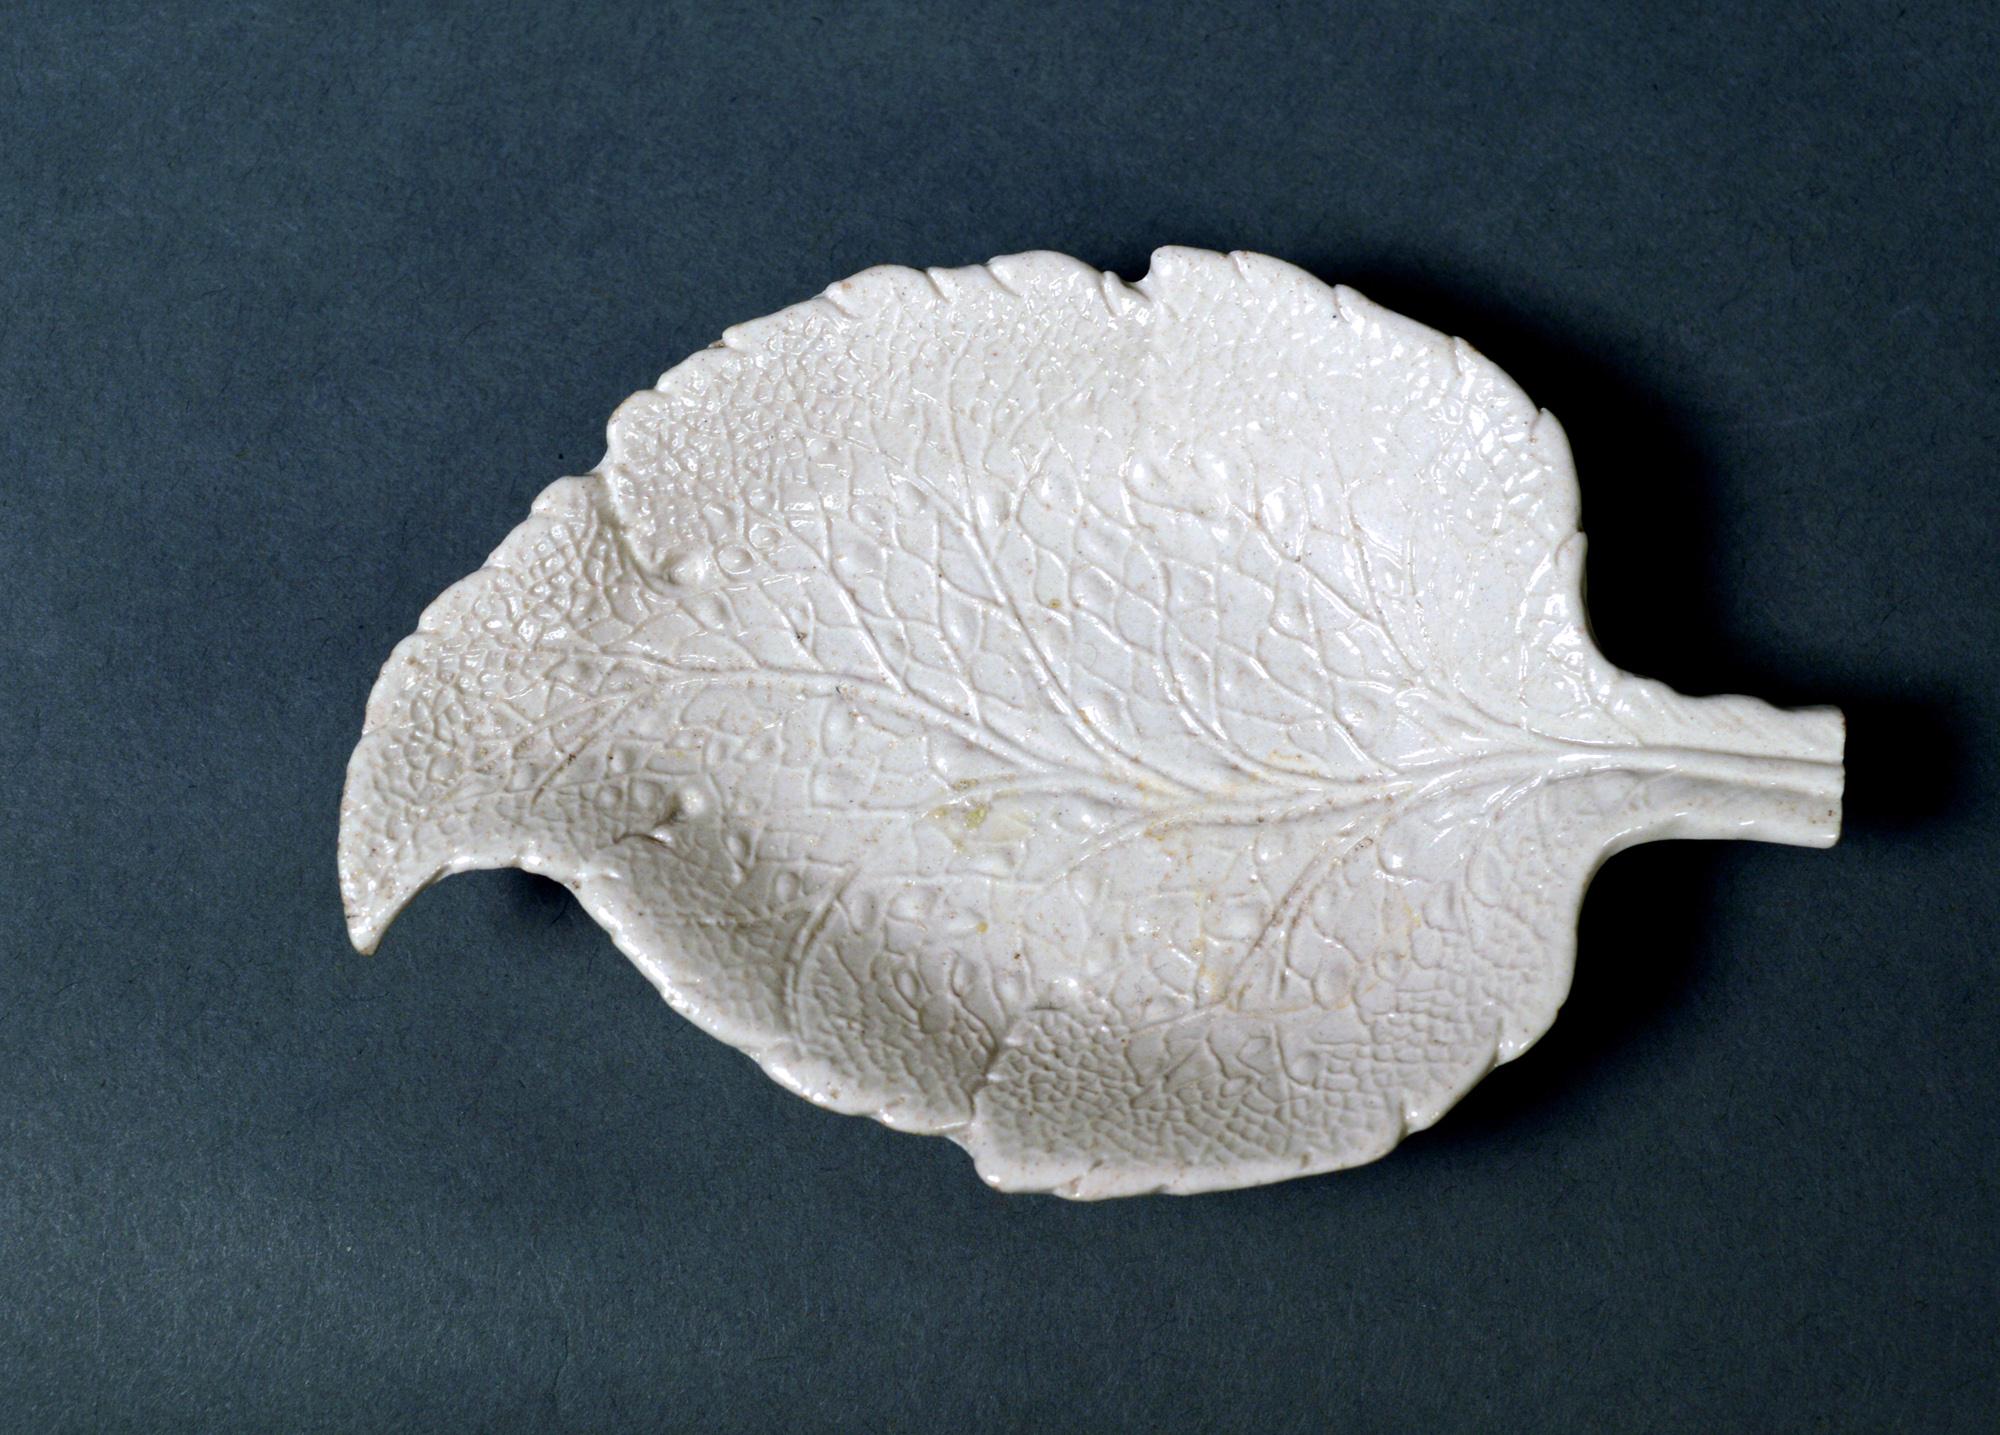 Salt-glazed stoneware sweetmeat dishes in the form of vine leaves,
a pair,
circa 1745-1765 
 
The Staffordshire salt glaze stoneware dishes are molded in the form of a vine leaf and are curved at the top of the leaf and with a straight stem at